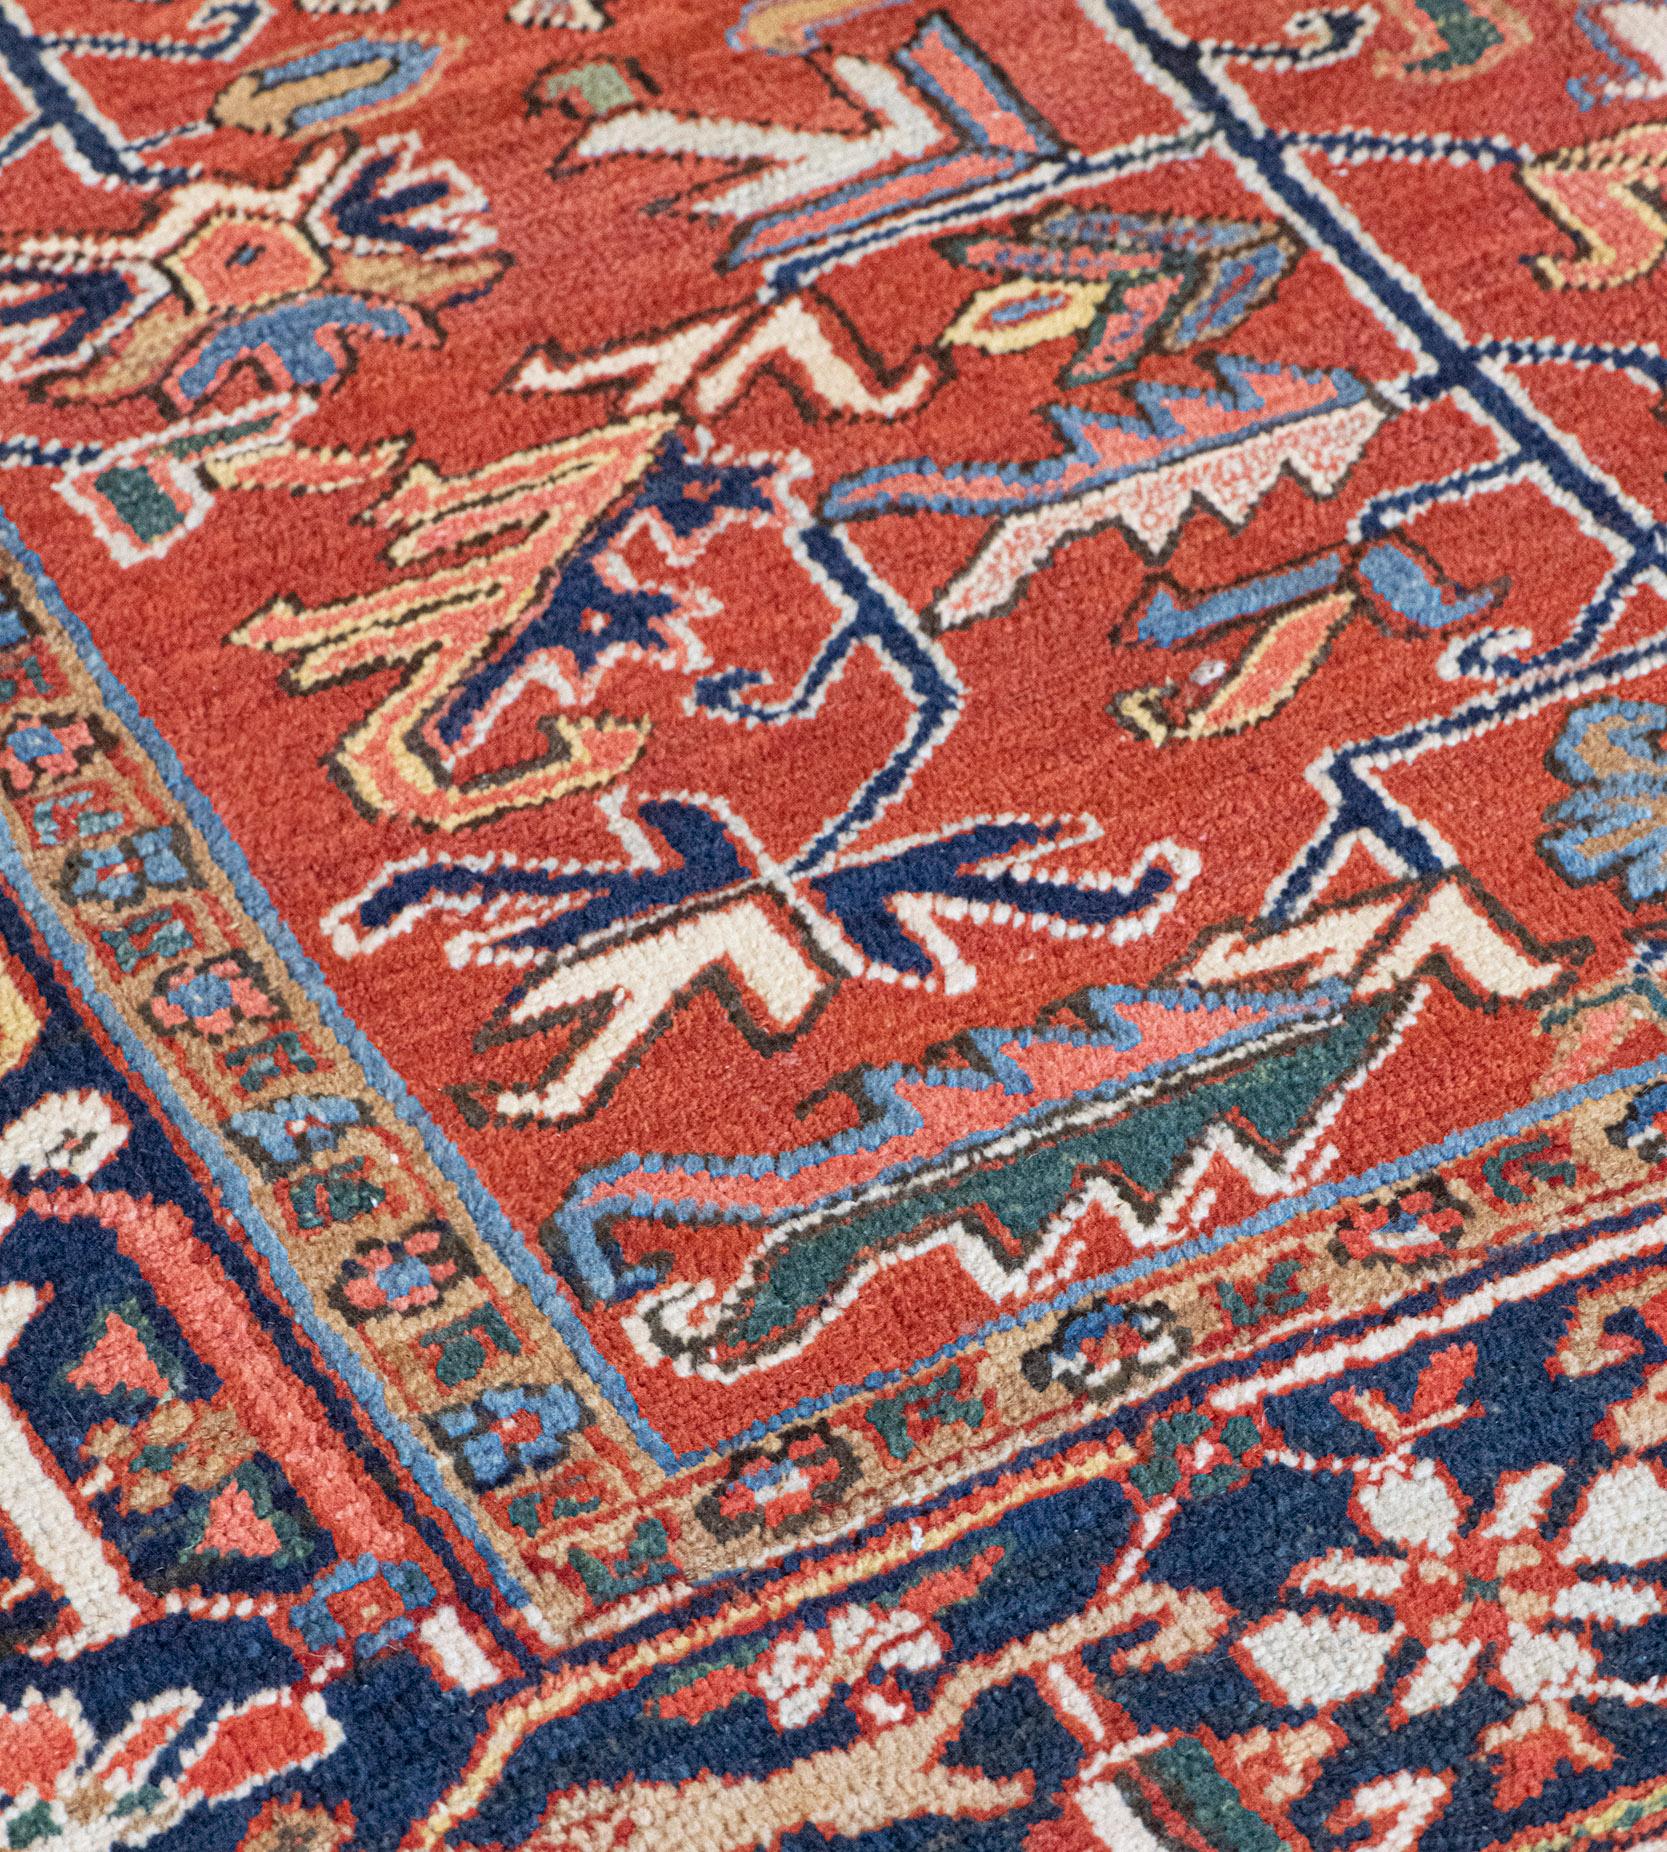 This traditional hand-woven Persian Heriz rug has a shaded brick overall field with a dense lattice of leafy angled floral vines, in a deep indigo turtle palmette border, between refined vine stripes.